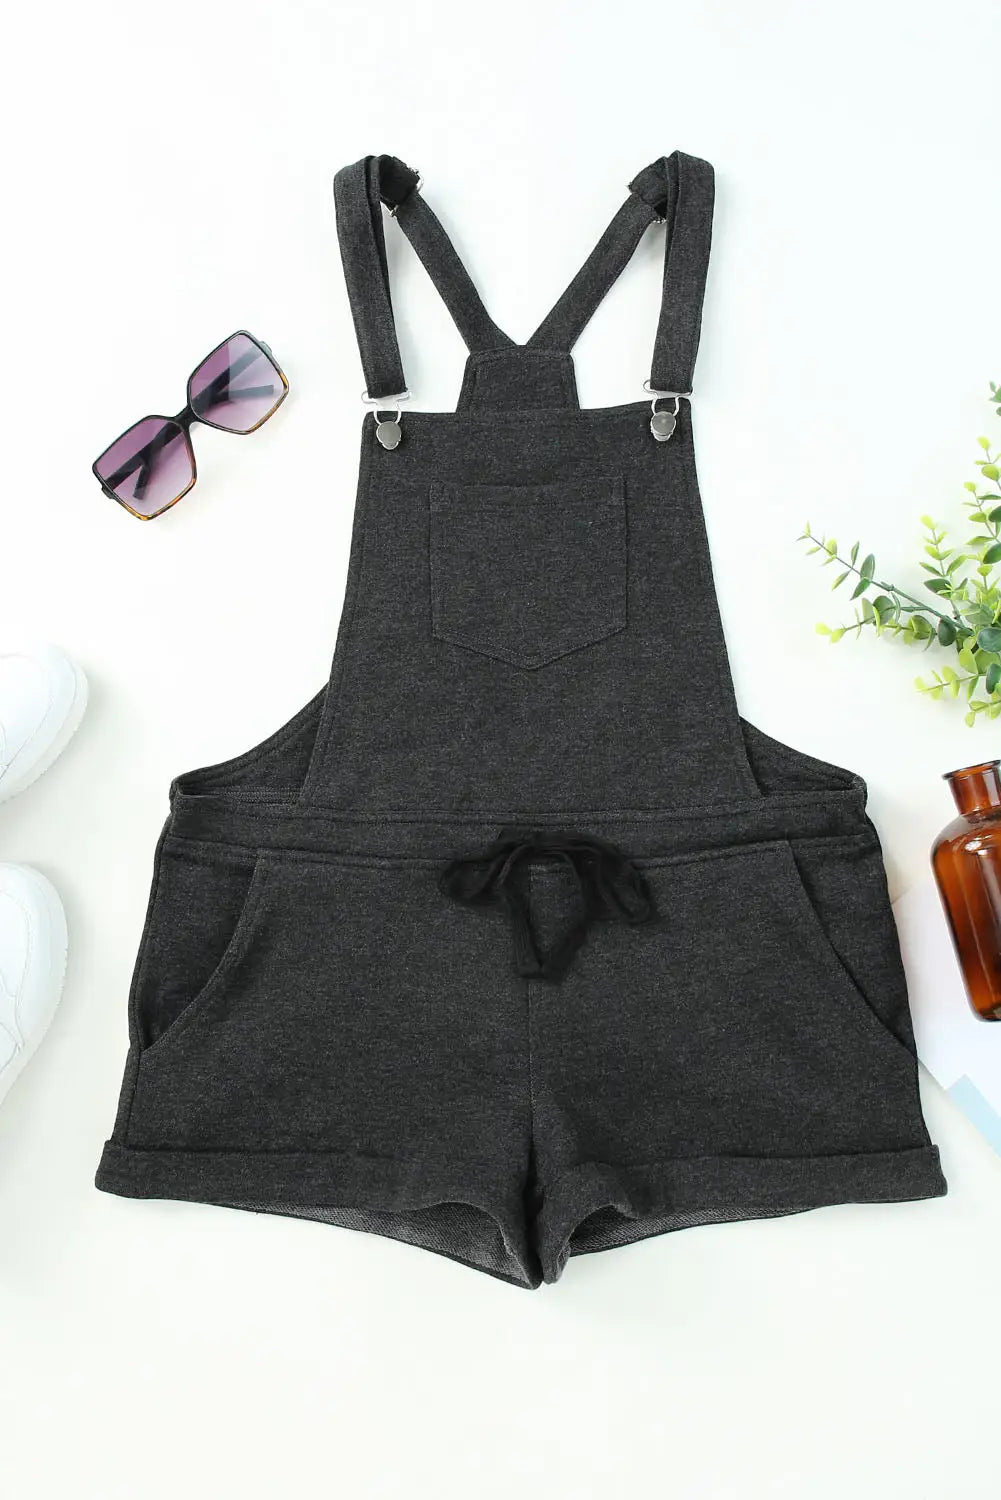 Gray vintage washed drawstring short overalls - jumpsuits & rompers